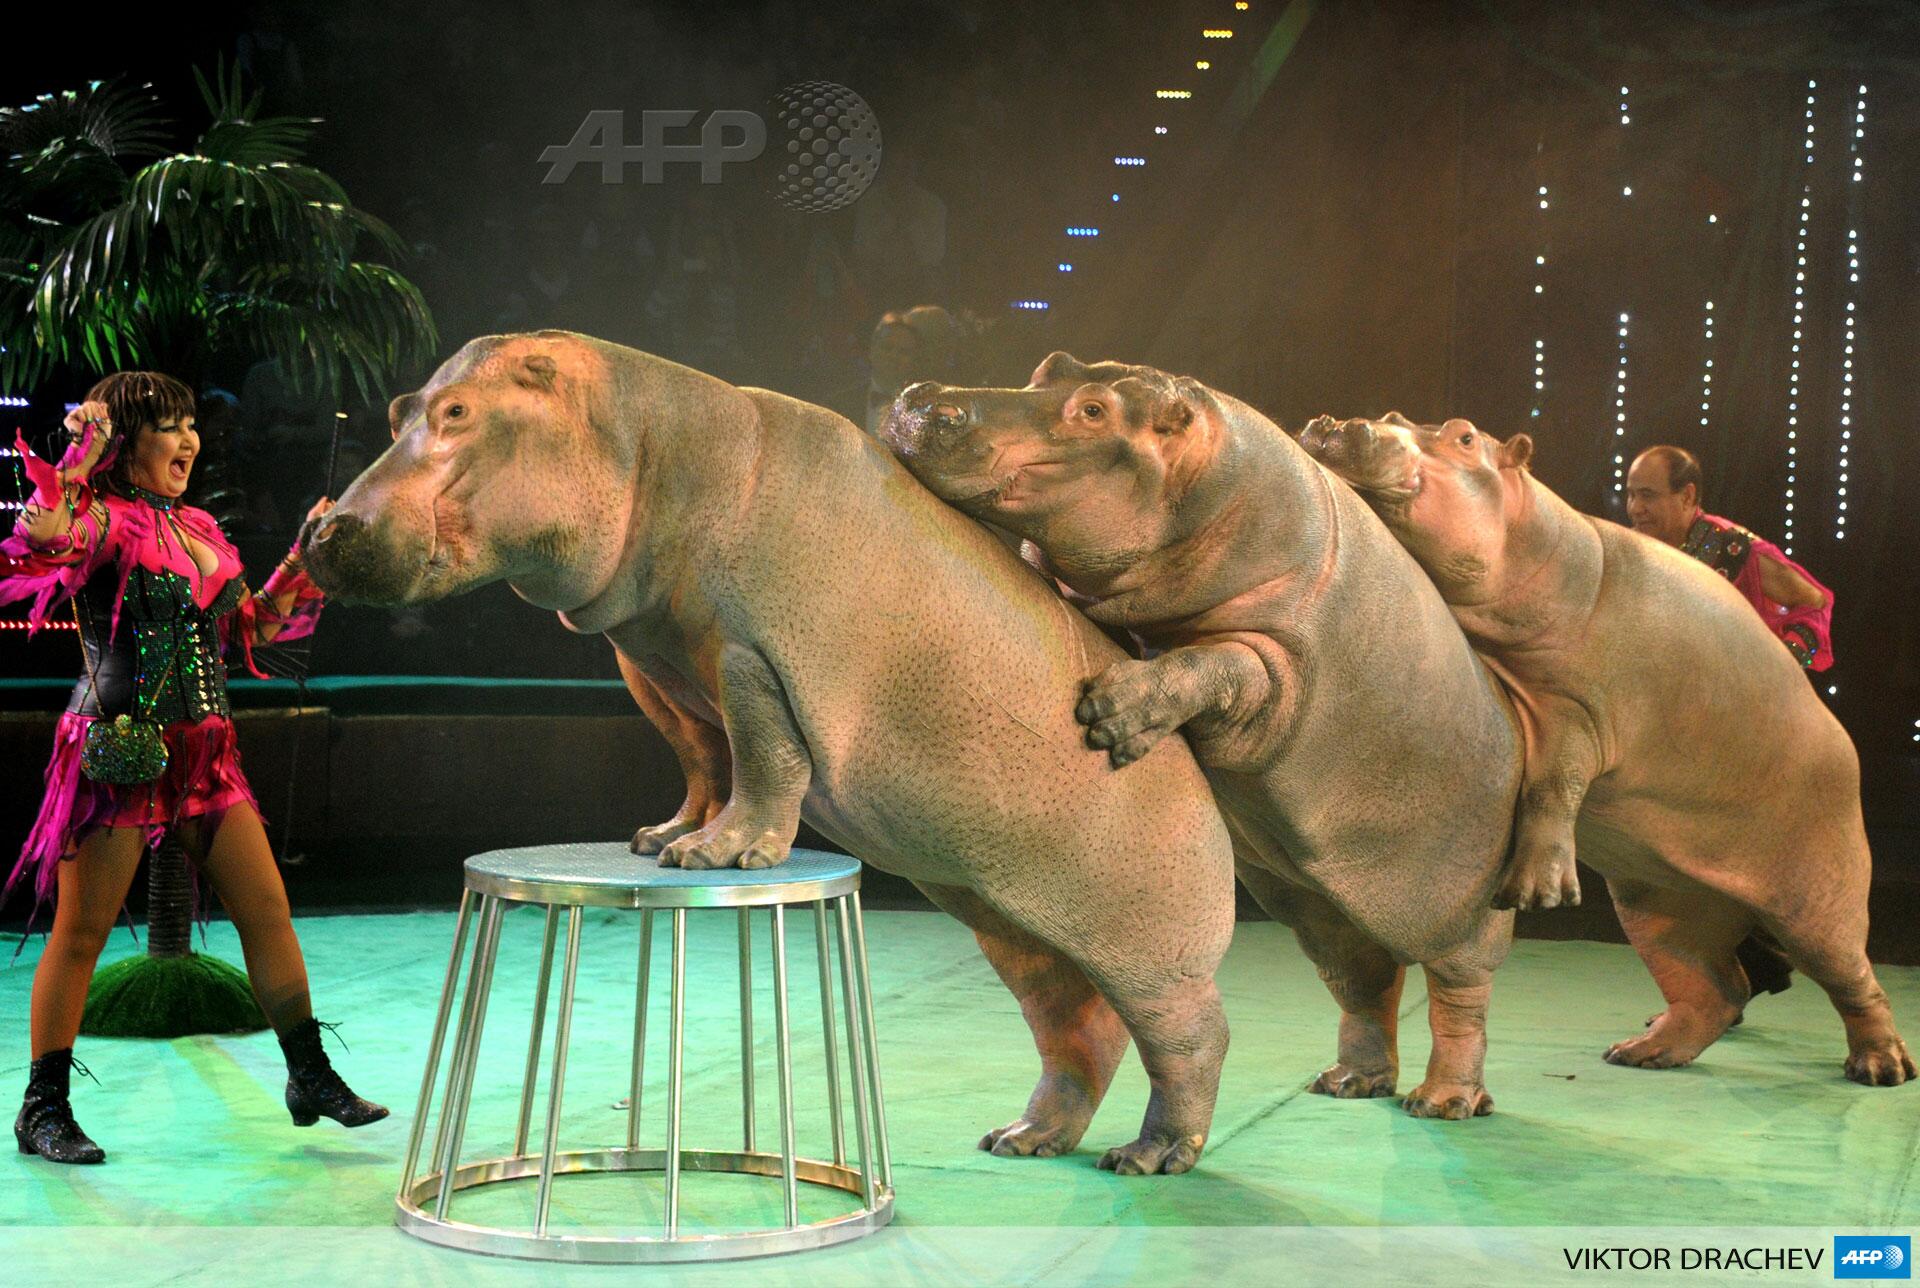 AFP News Agency on Twitter: "Hippos perform in a circus in the Belarus  capital Minsk yesterday http://t.co/WTbk9LMTbI" / Twitter